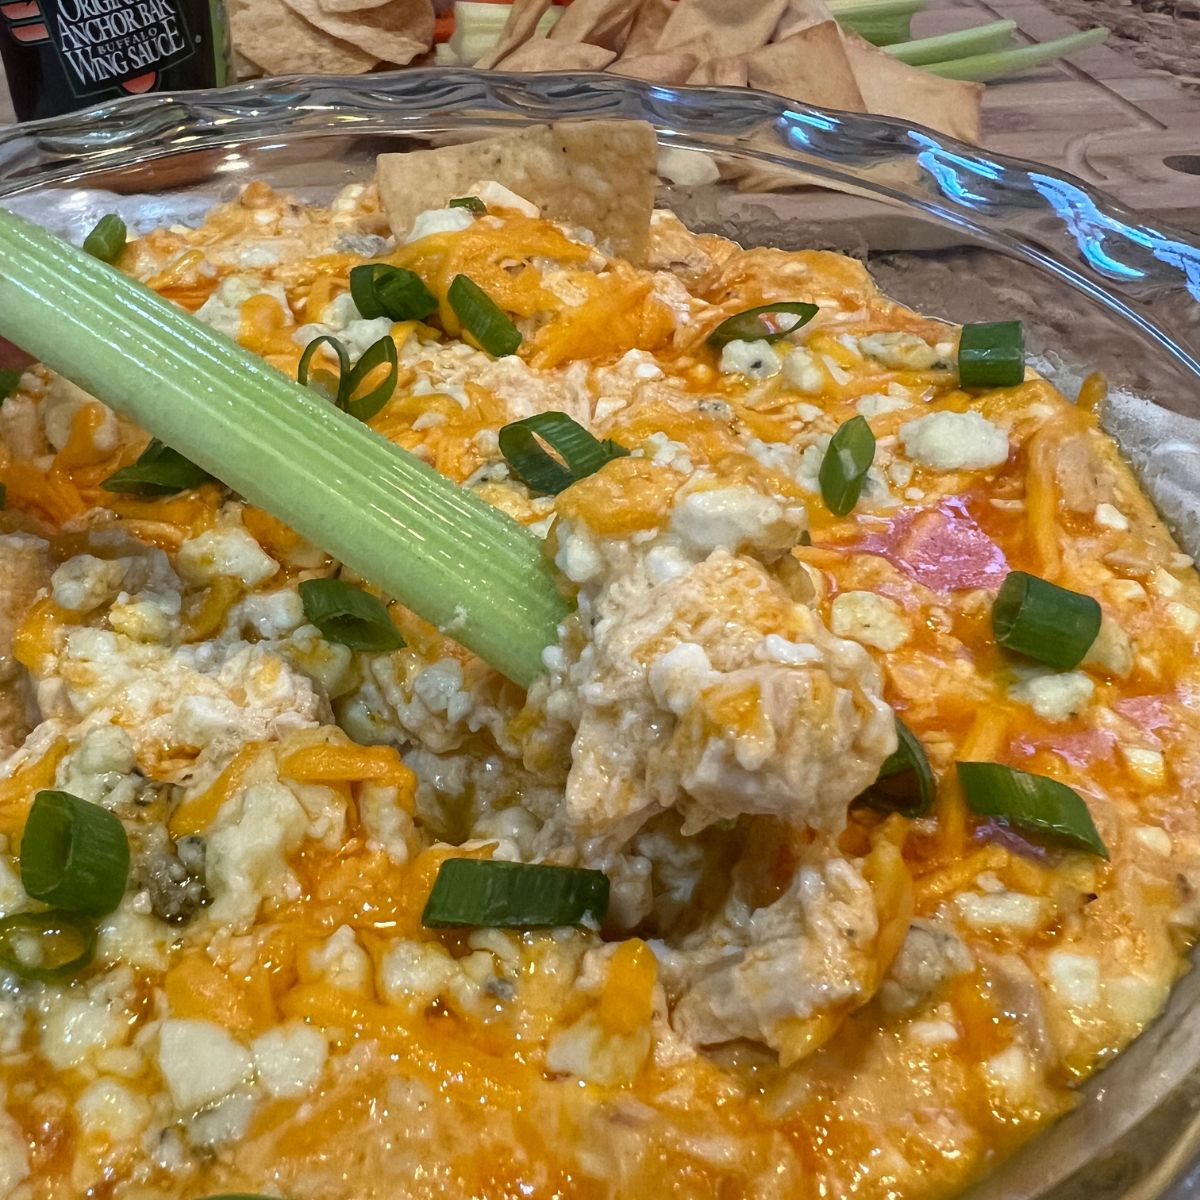 A celery stick being dipped in buffalo chicken dip